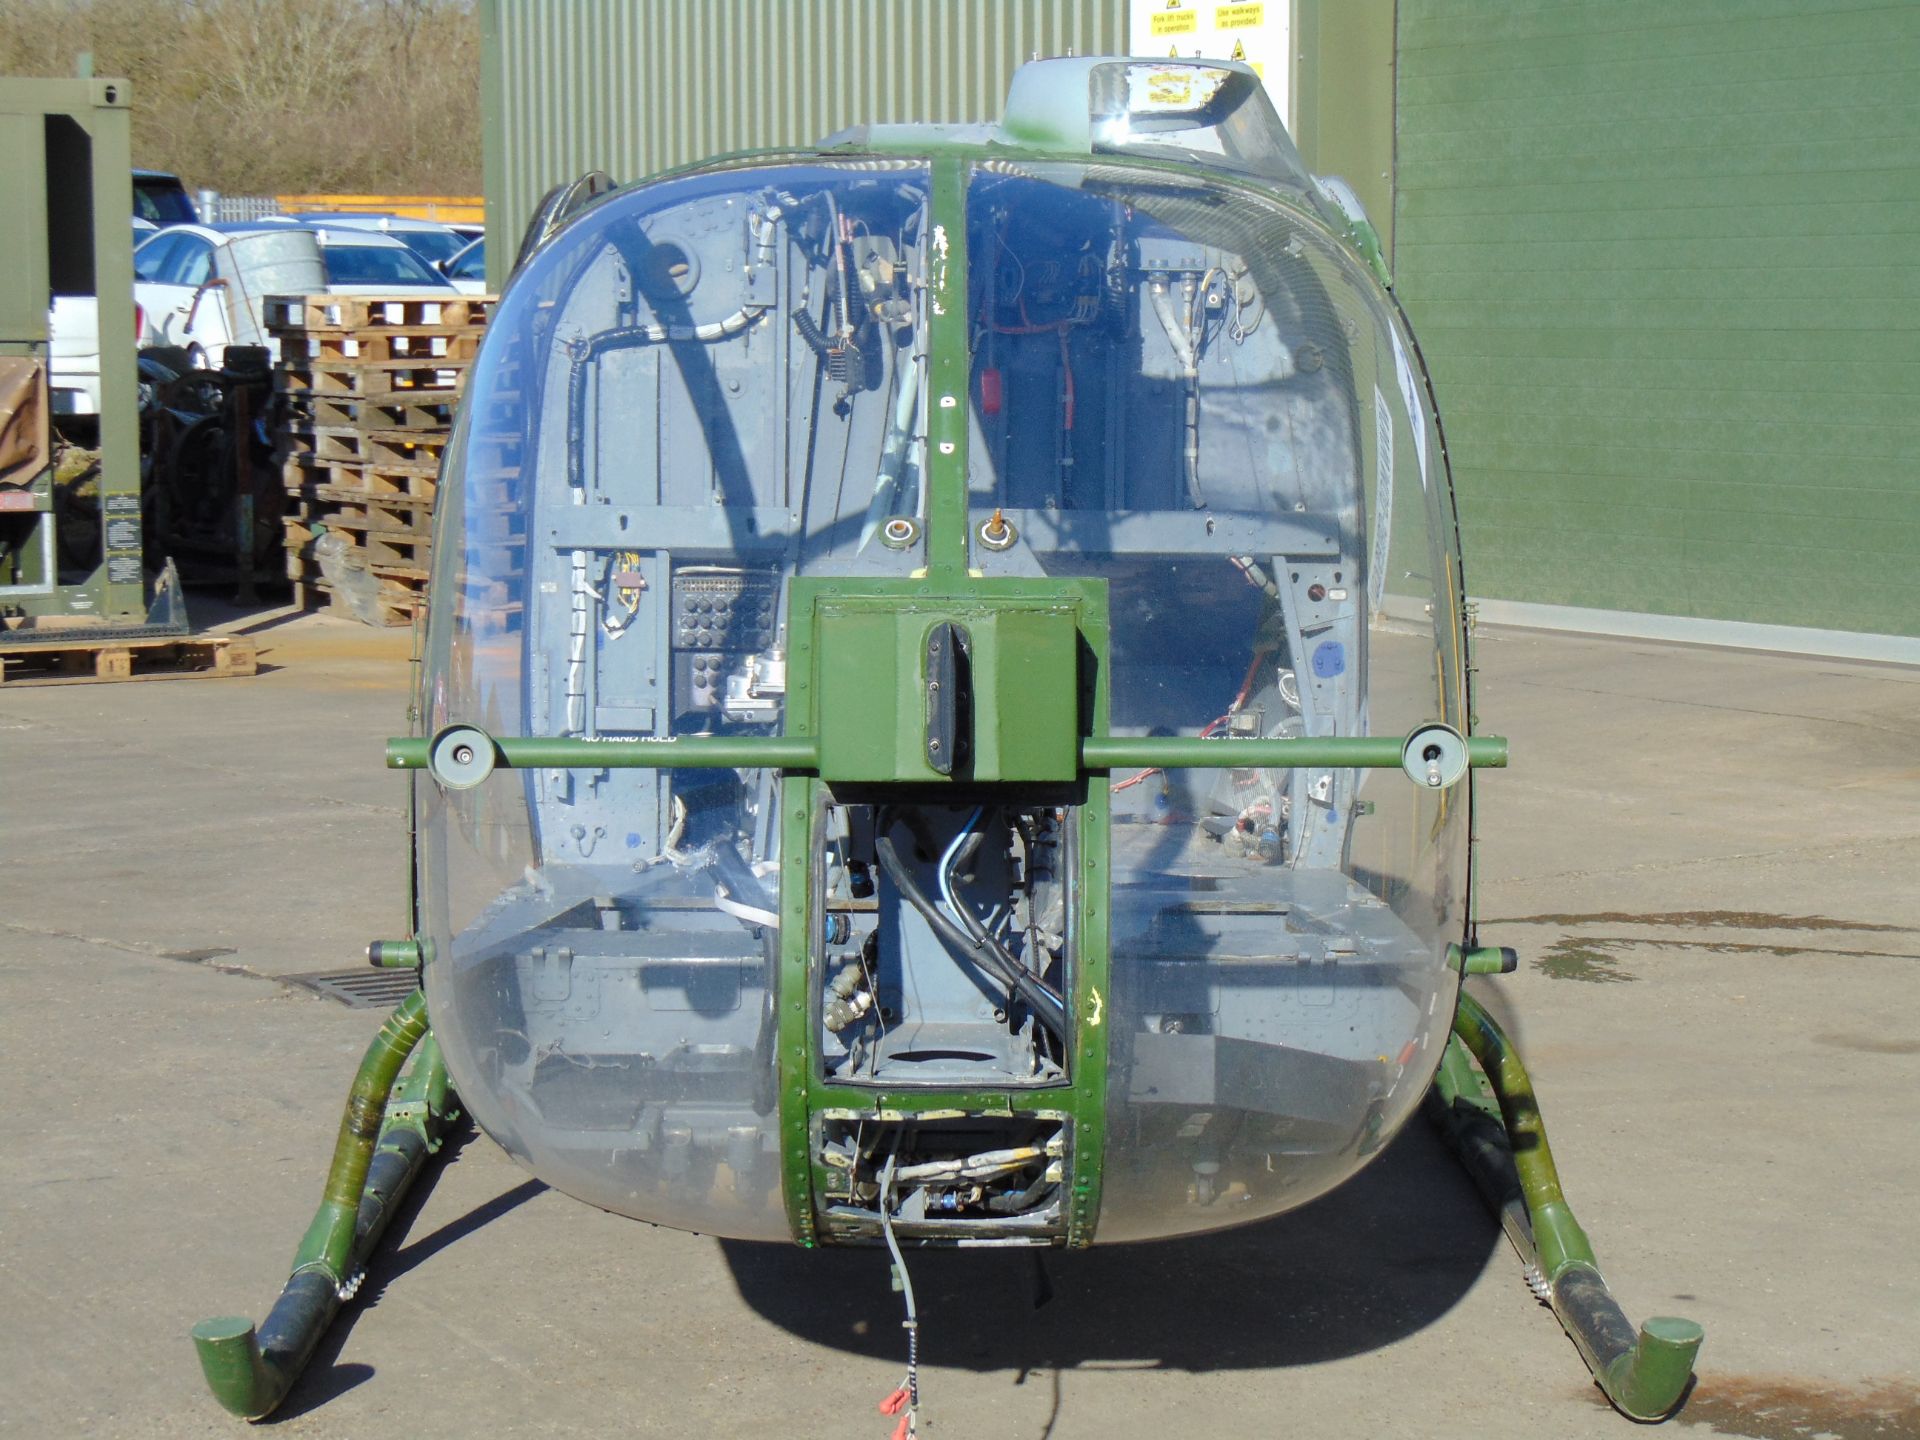 Gazelle AH 1 Turbine Helicopter Airframe (TAIL NUMBER XZ303) - Image 3 of 25